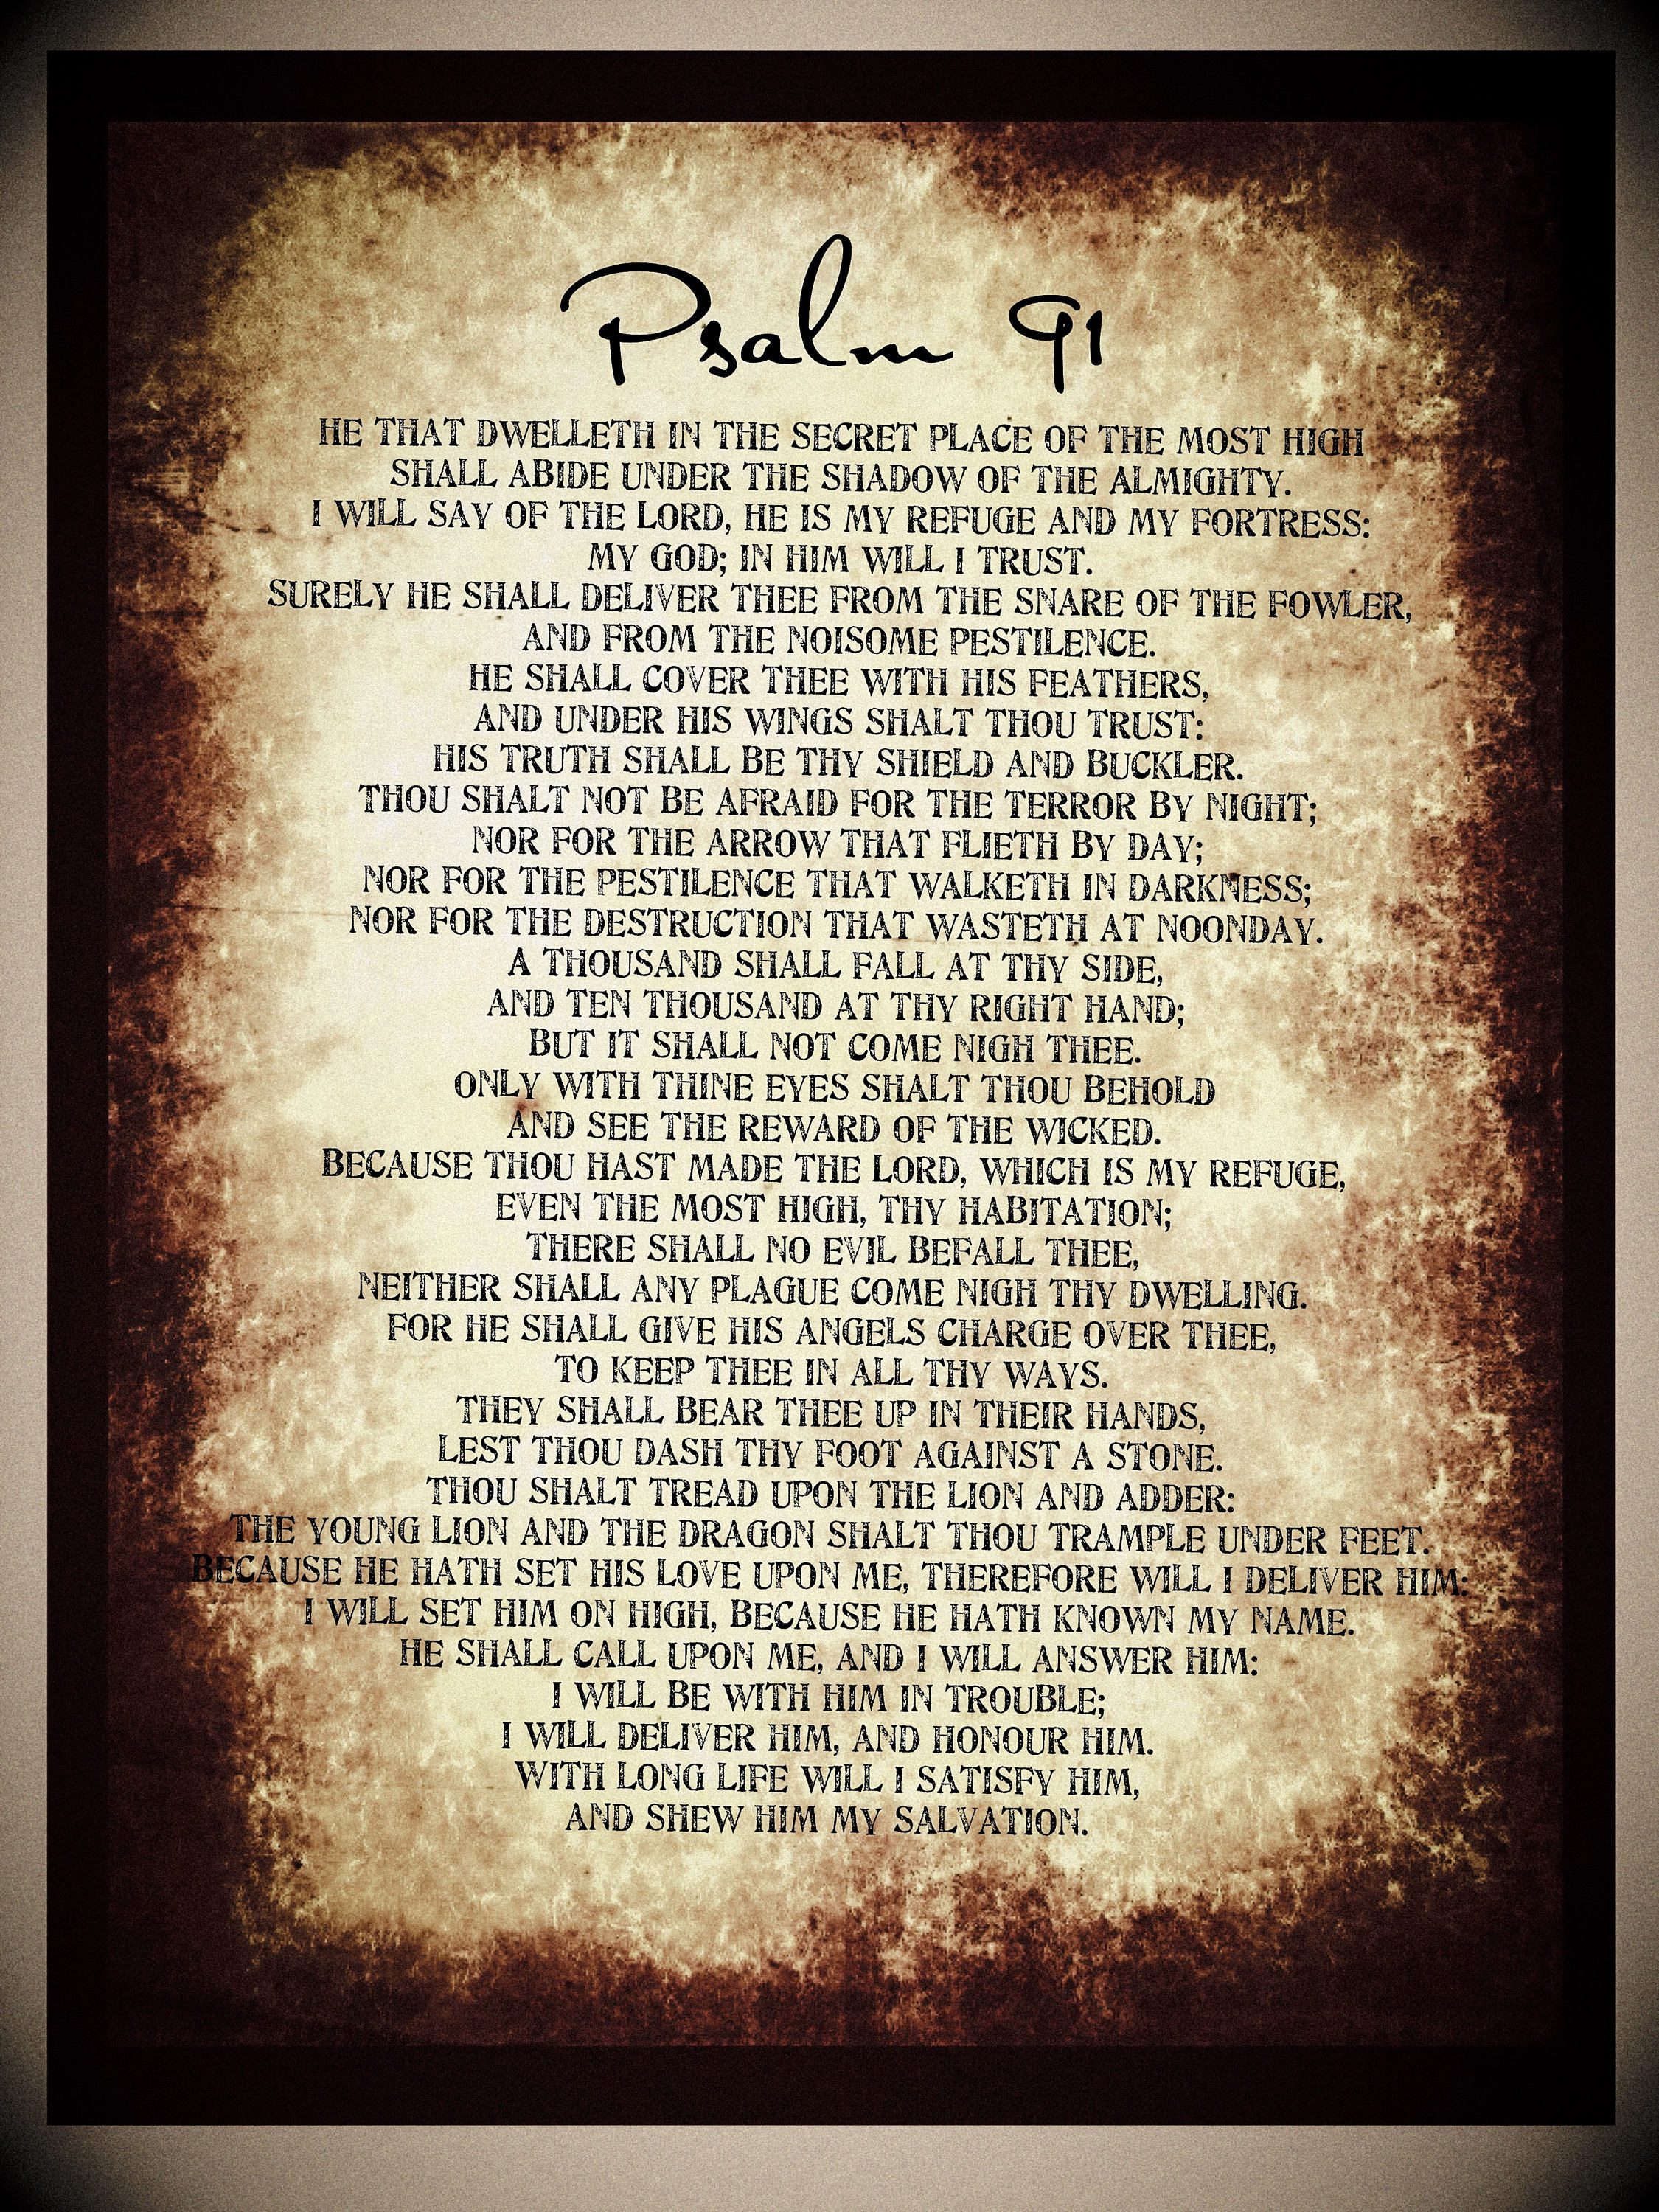 psalm-91-poster-a4-bible-poster-psalm-91